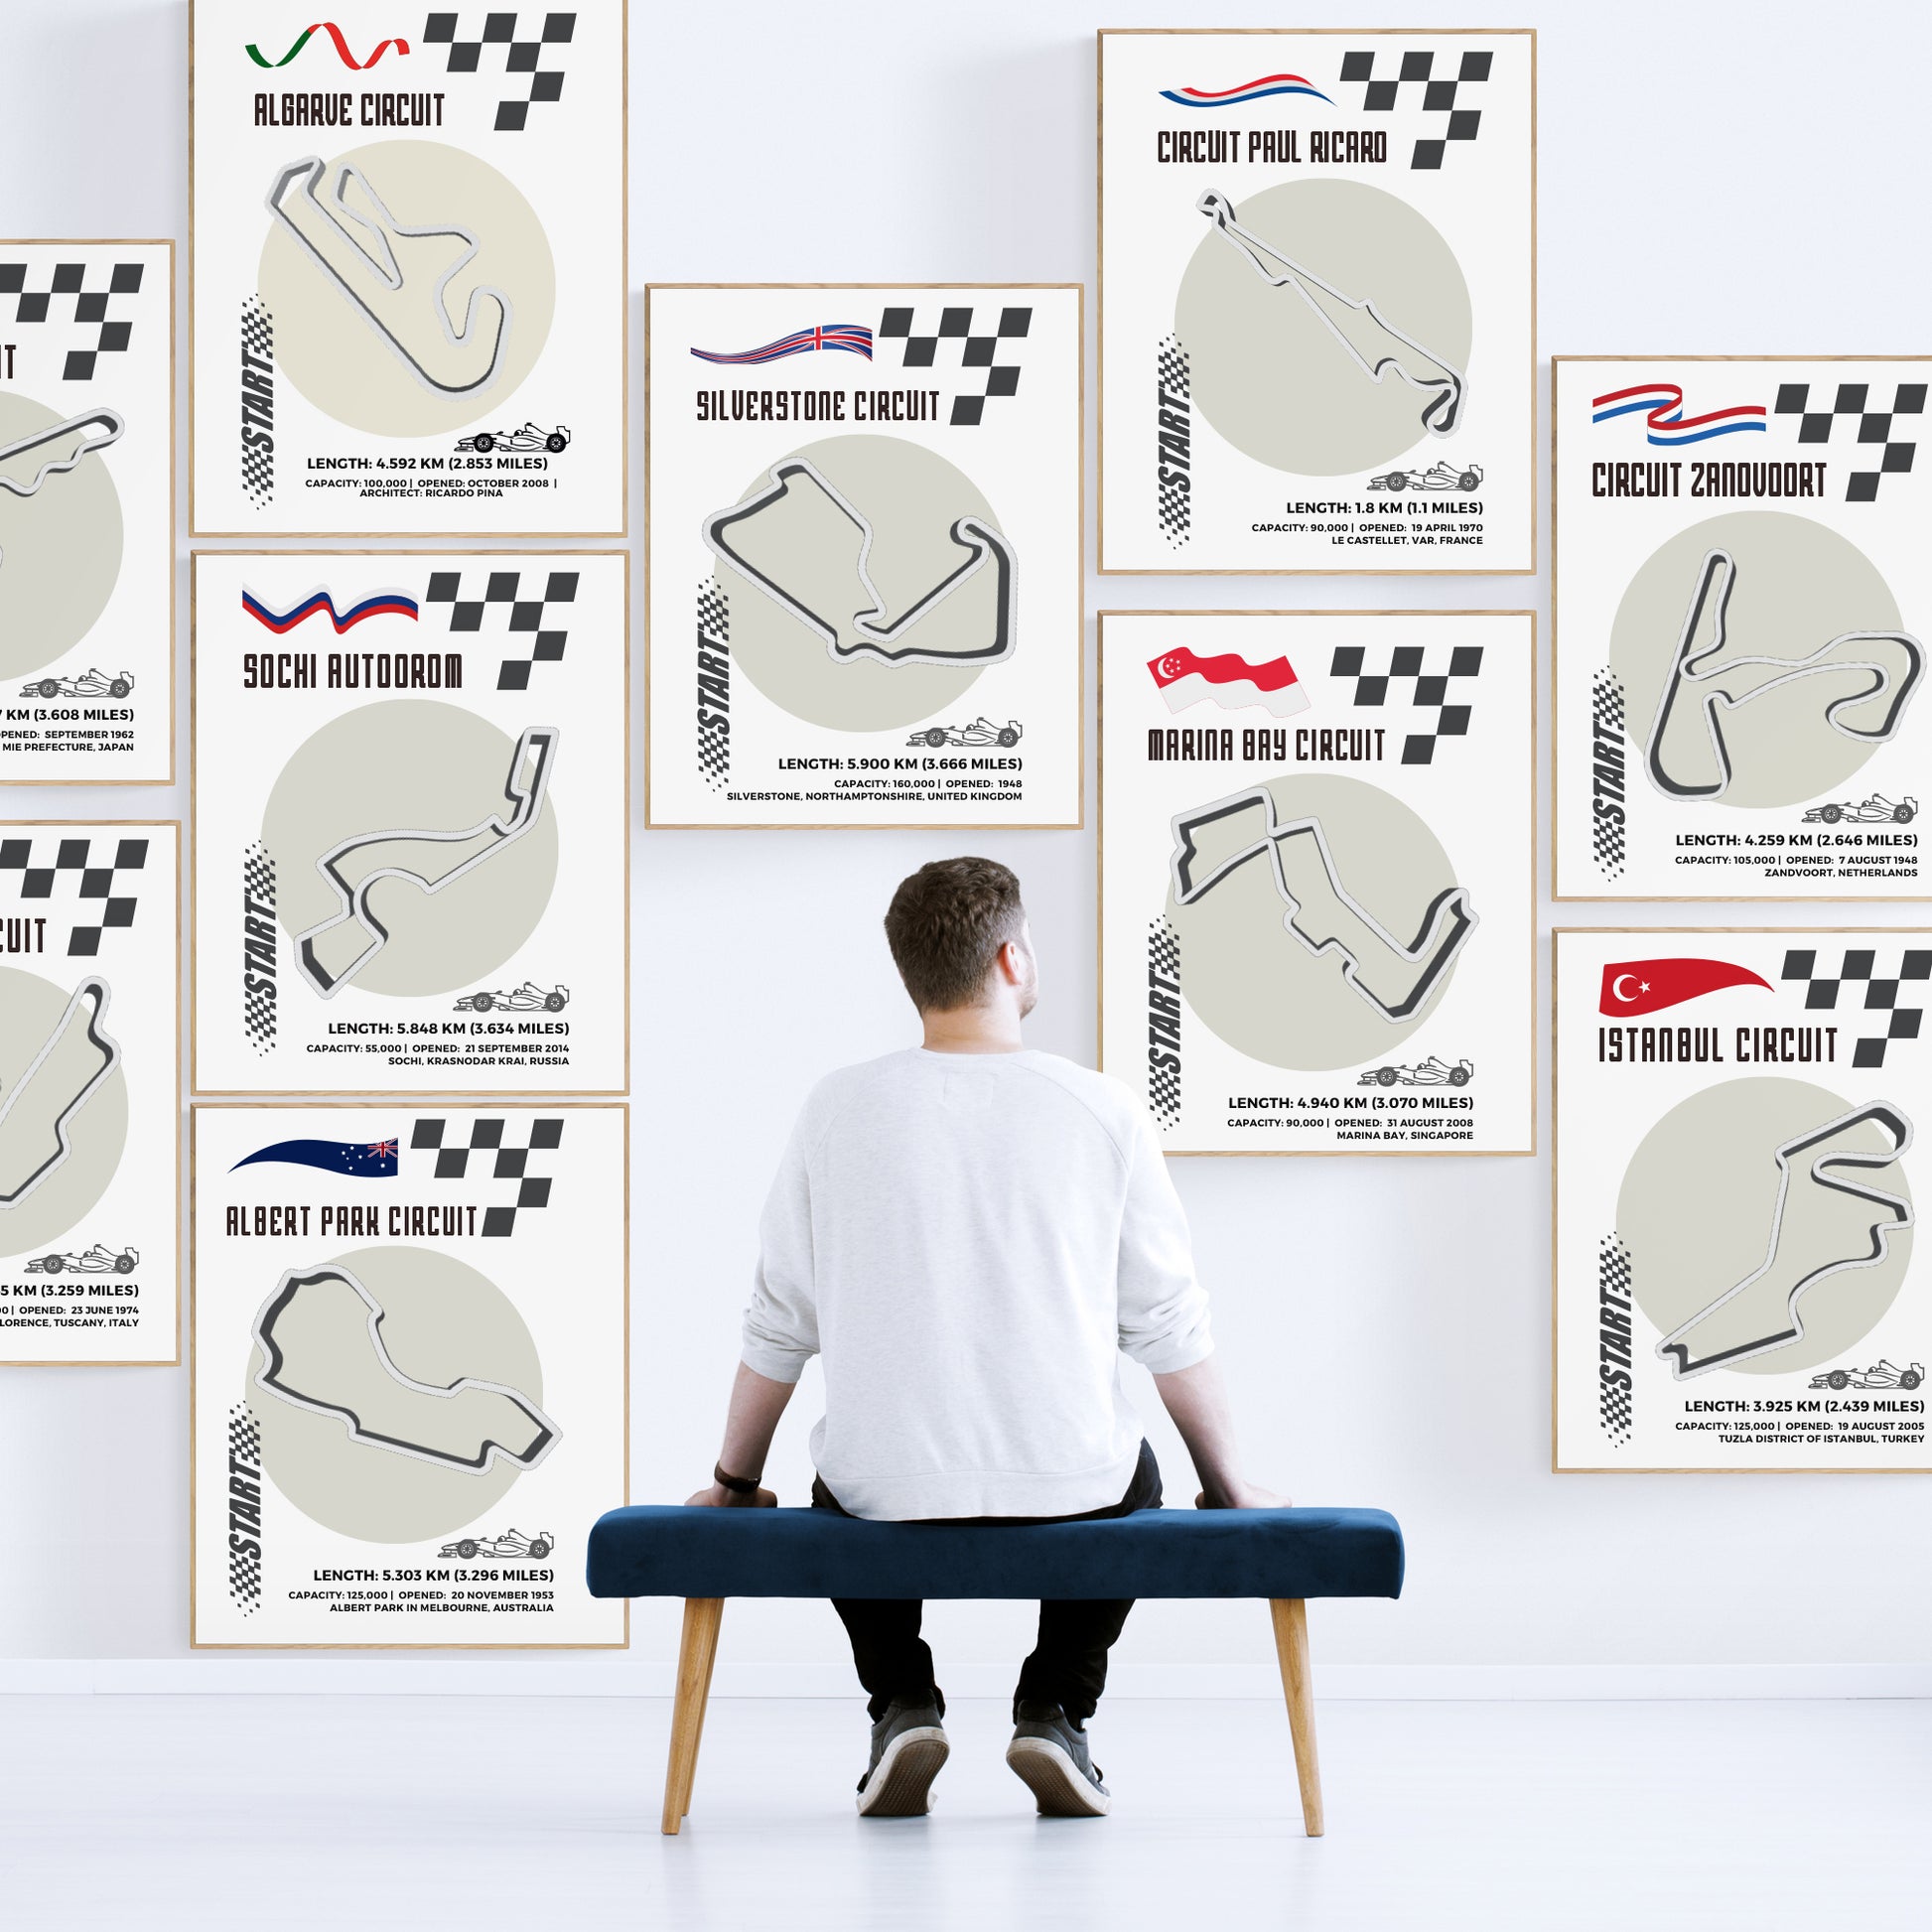 Experience the thrill of Formula One with our Istanbul Circuit F1 Posters. Made with premium, age-resistant paper, each poster features a detailed map of the racing tracks, circuit guide, and historical information. Perfect for any Formula One fan, these posters are a must-have addition to your home decor collection. Complete the look with our "Formula One Poster" and showcase your love for the legendary Monza, iconic Monaco, or exhilarating Spa-Francorchamps